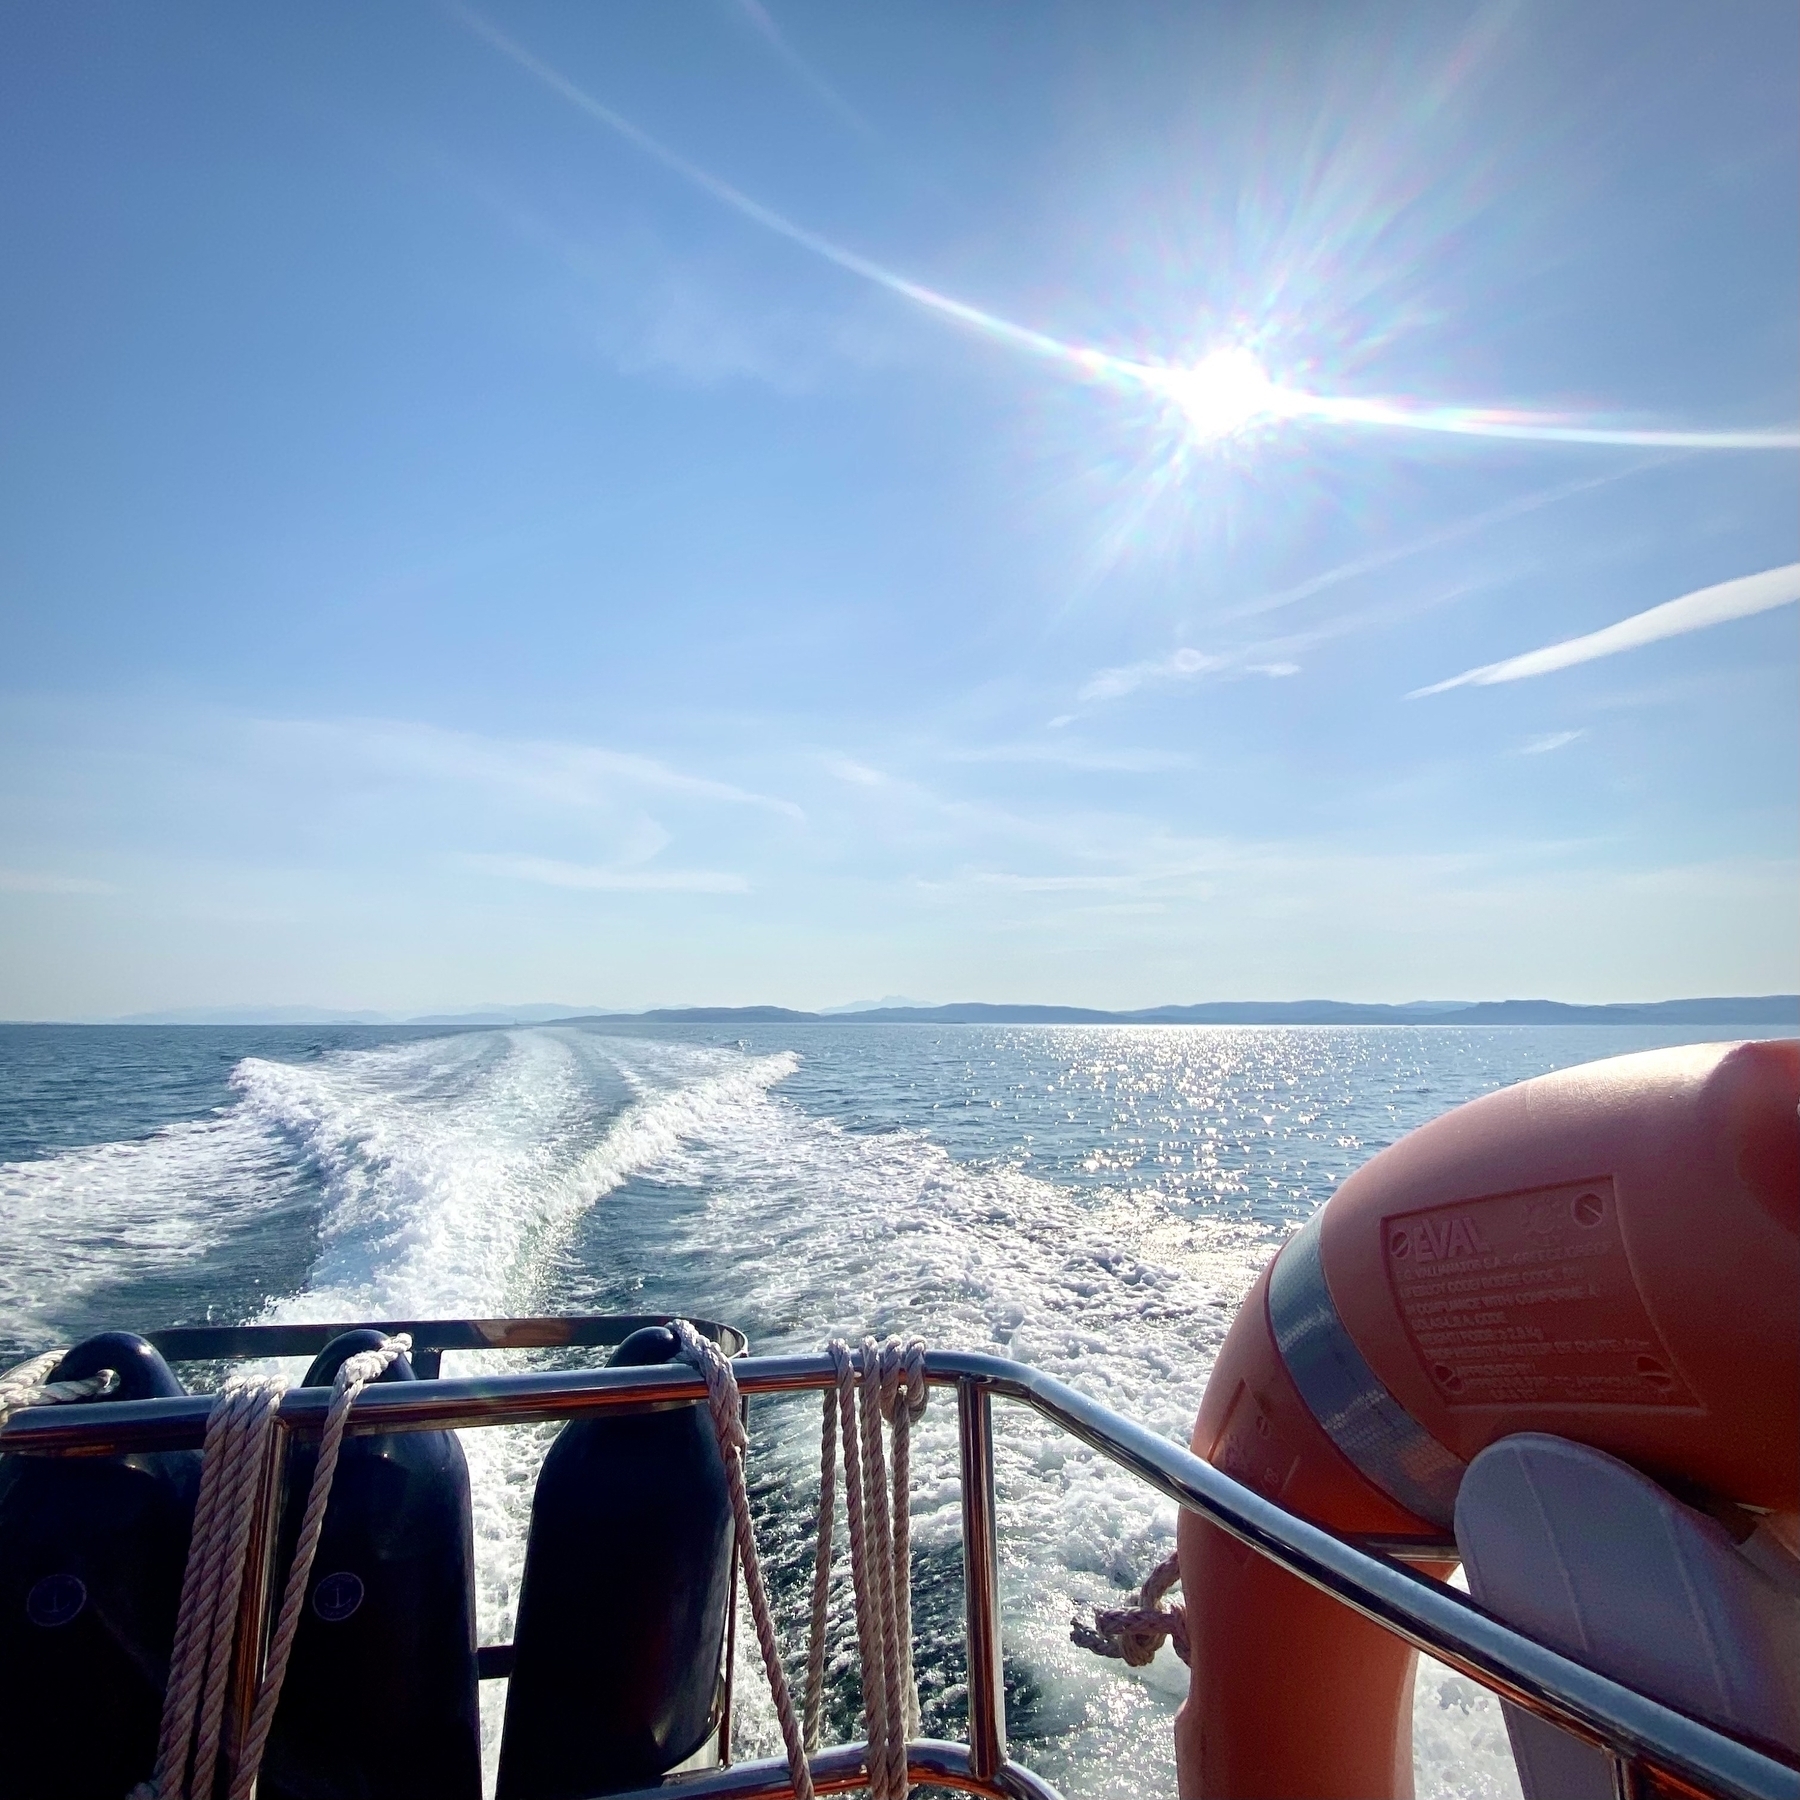 Photograph of the wake behind our small boat. The sea and sky are deep blue, the sun flares on the camera lens highlights the faint whispy clouds. Chrome railings and a red lifebuoy.